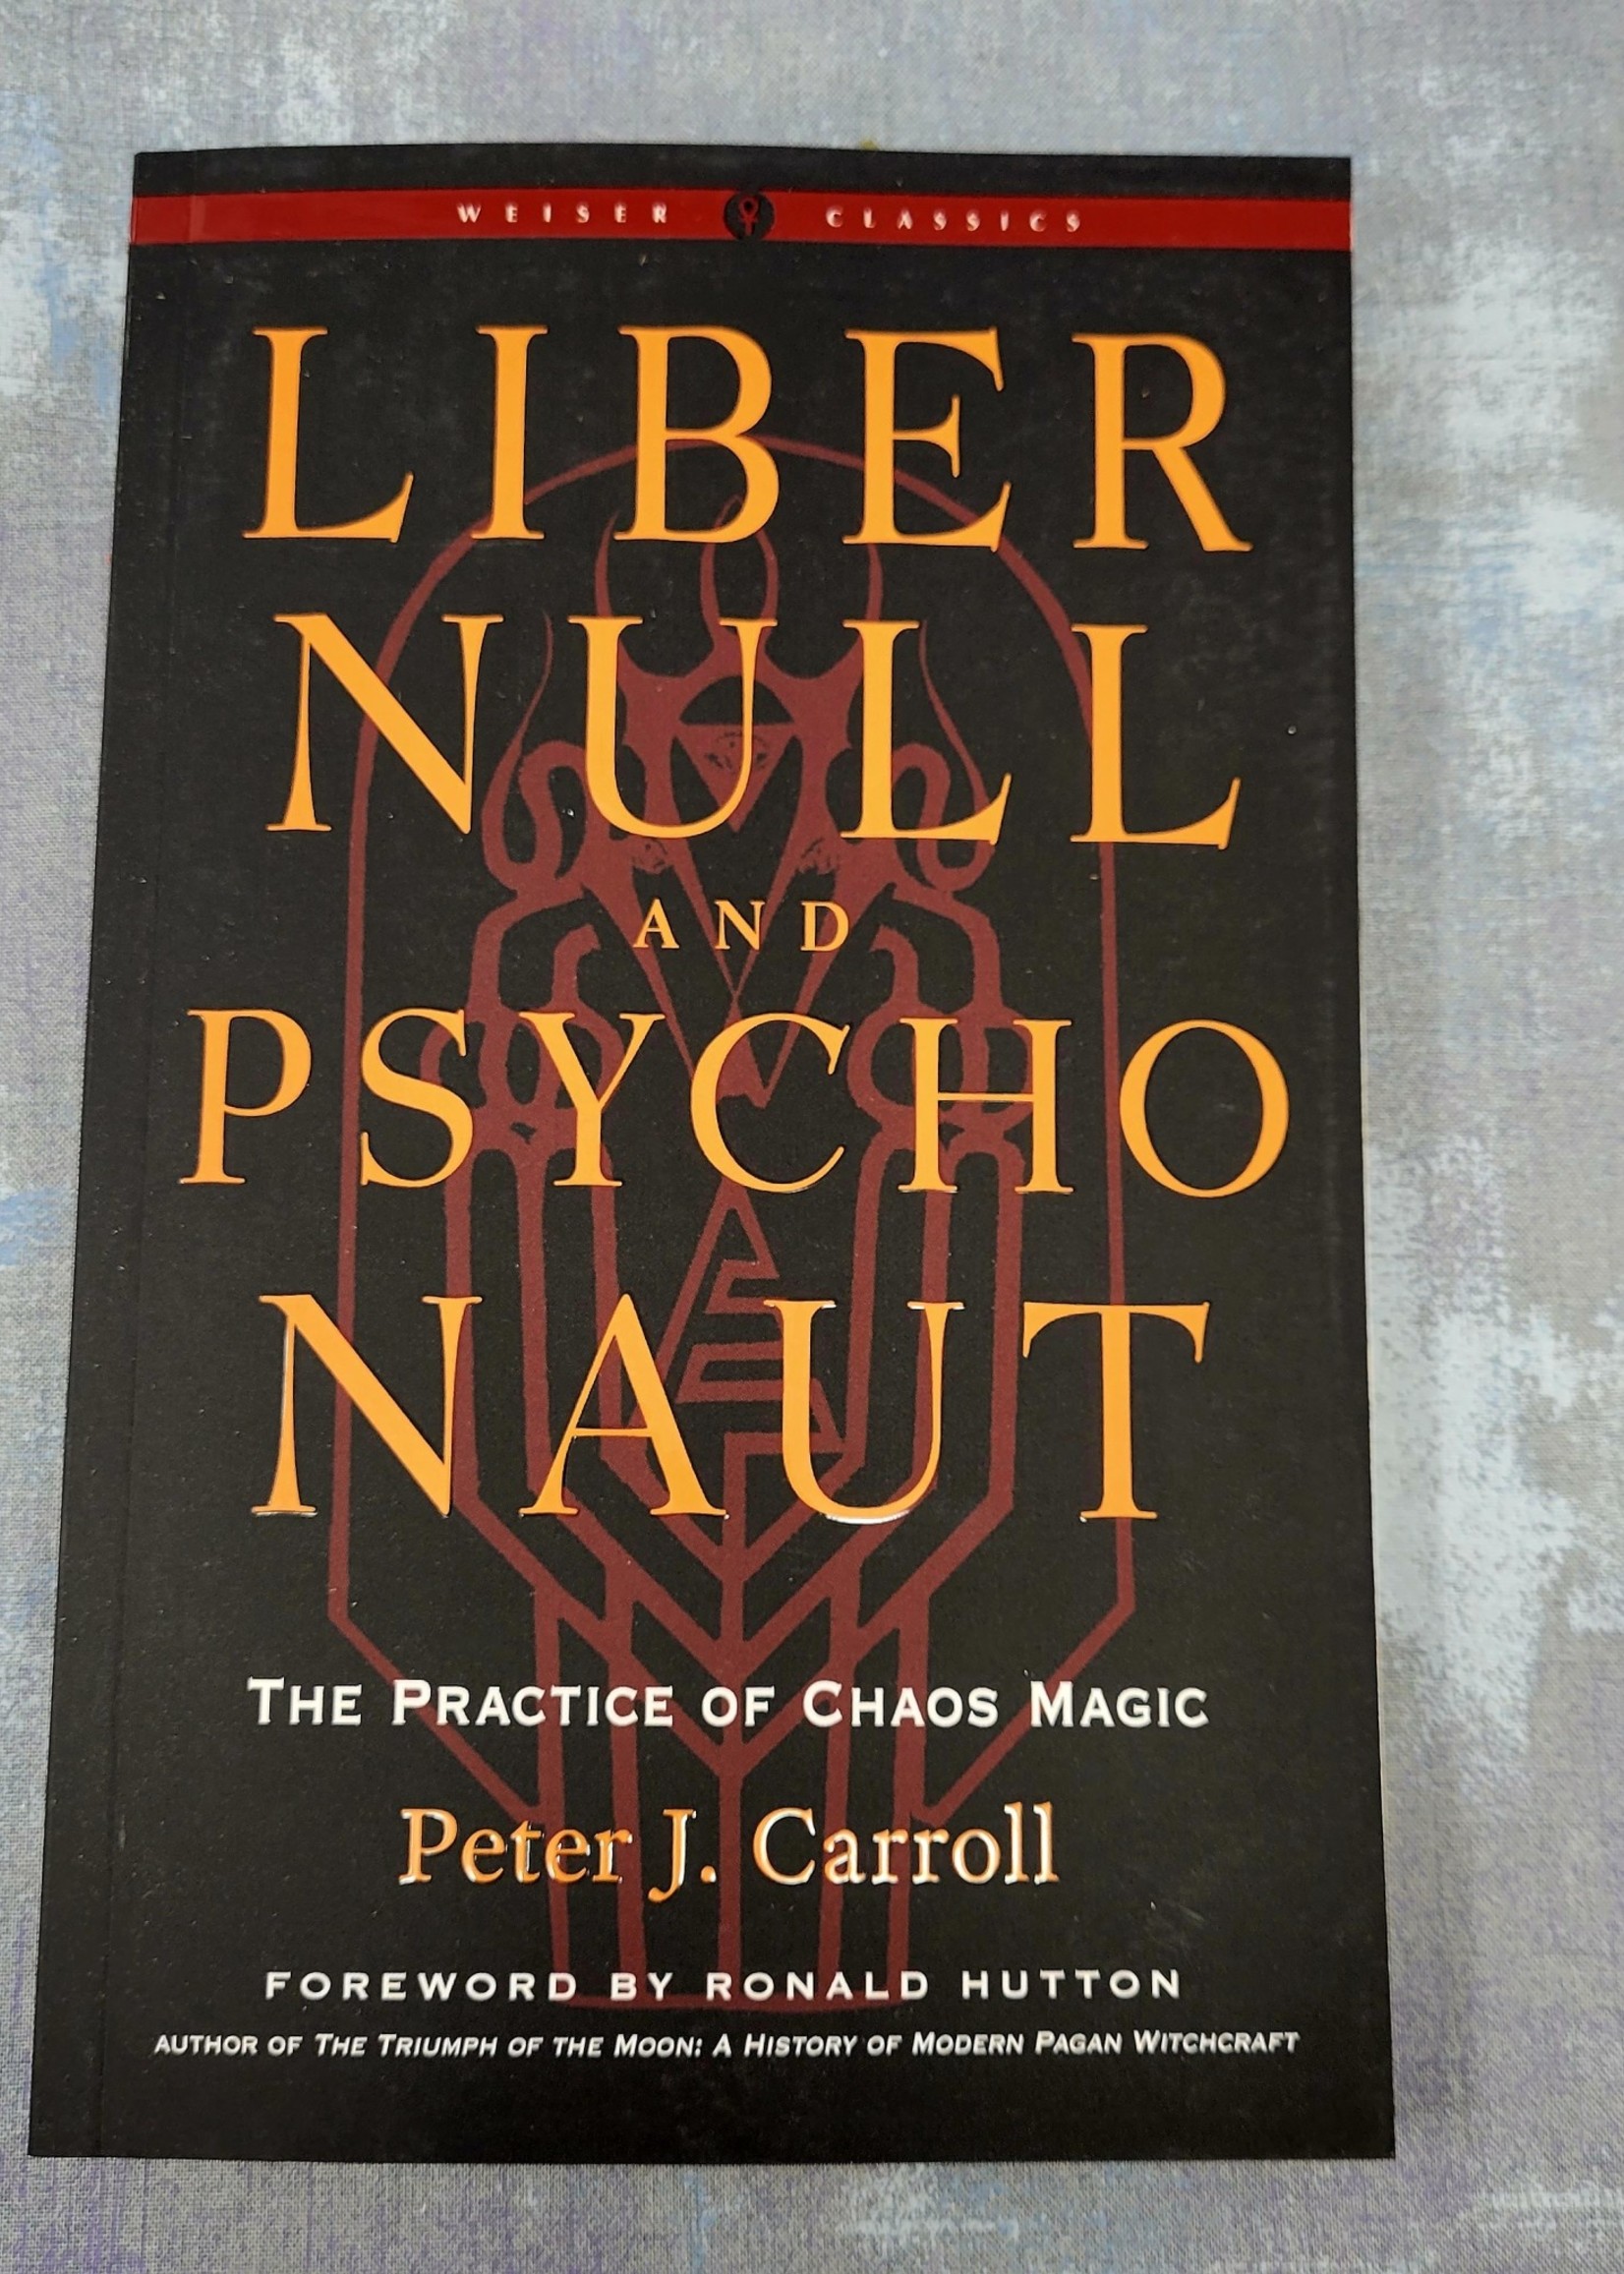 Liber Null & Psychonaut The Practice of Chaos Magic (Revised and Expanded Edition) (Weiser Classics Series) Peter J. Carroll, Foreword by: Ronald Hutton